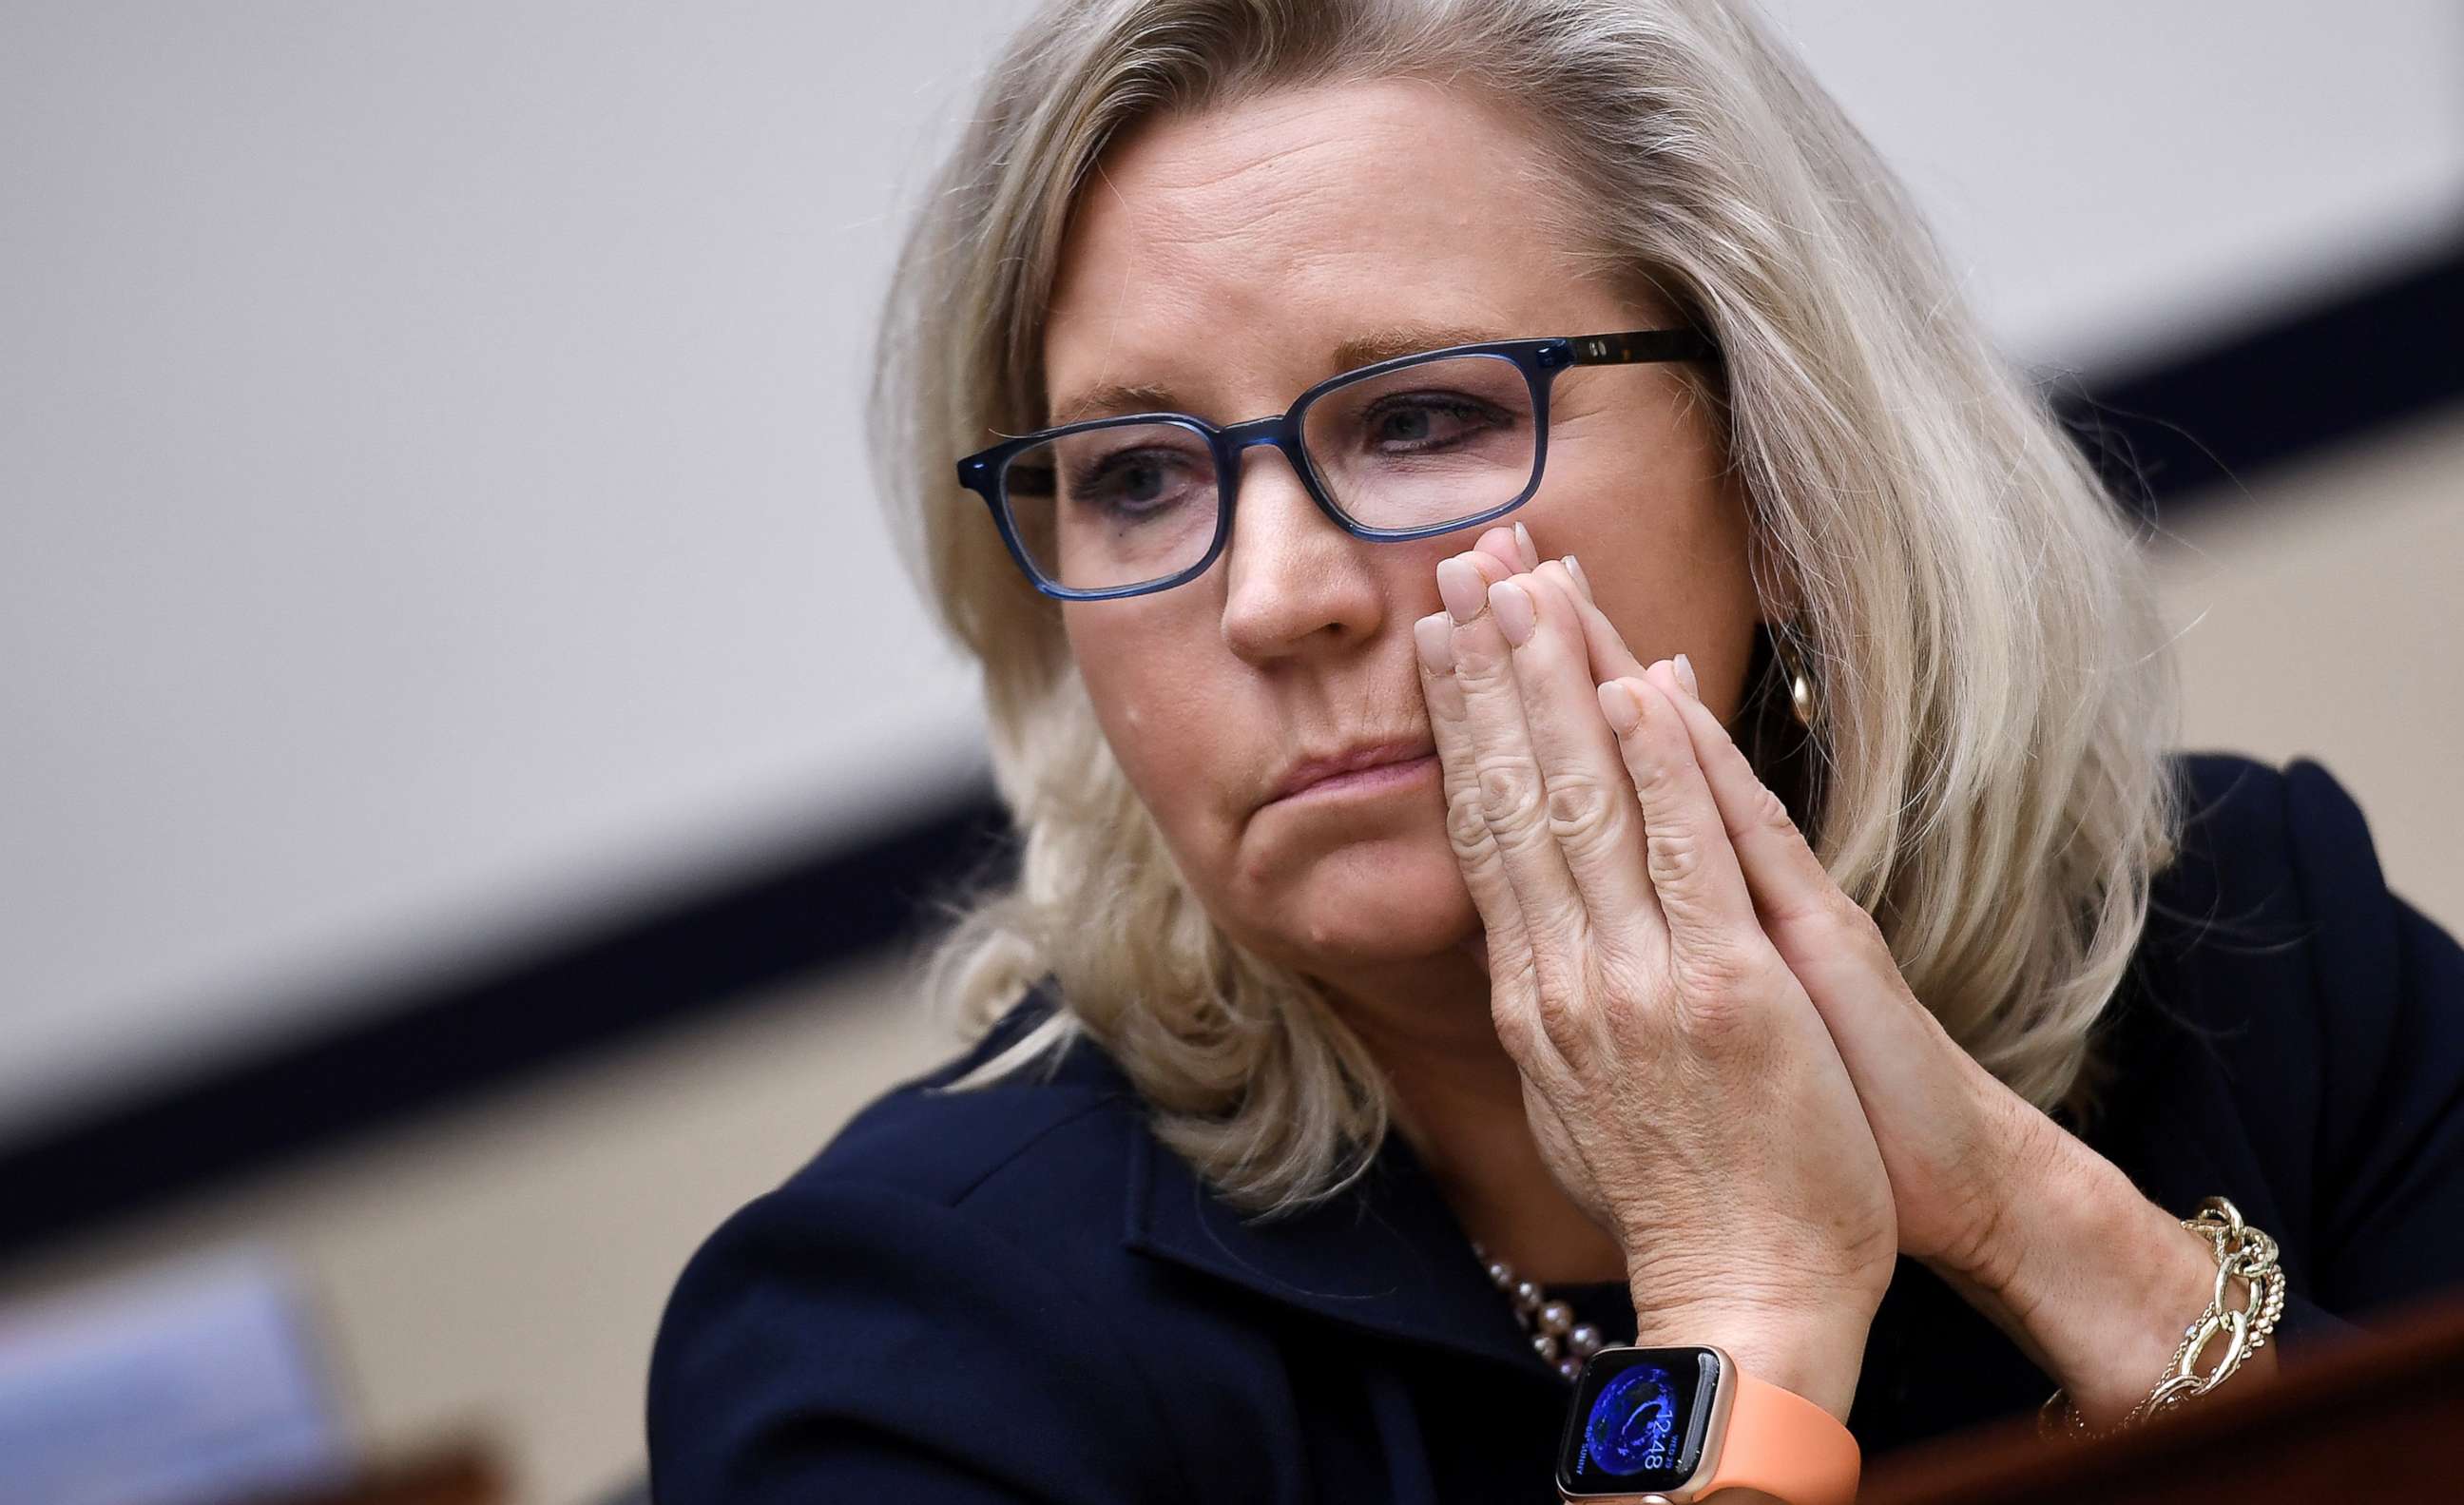 PHOTO: Representative Liz Cheney listens during a House Armed Services Committee hearing in Washington, Sept. 29, 2021. 